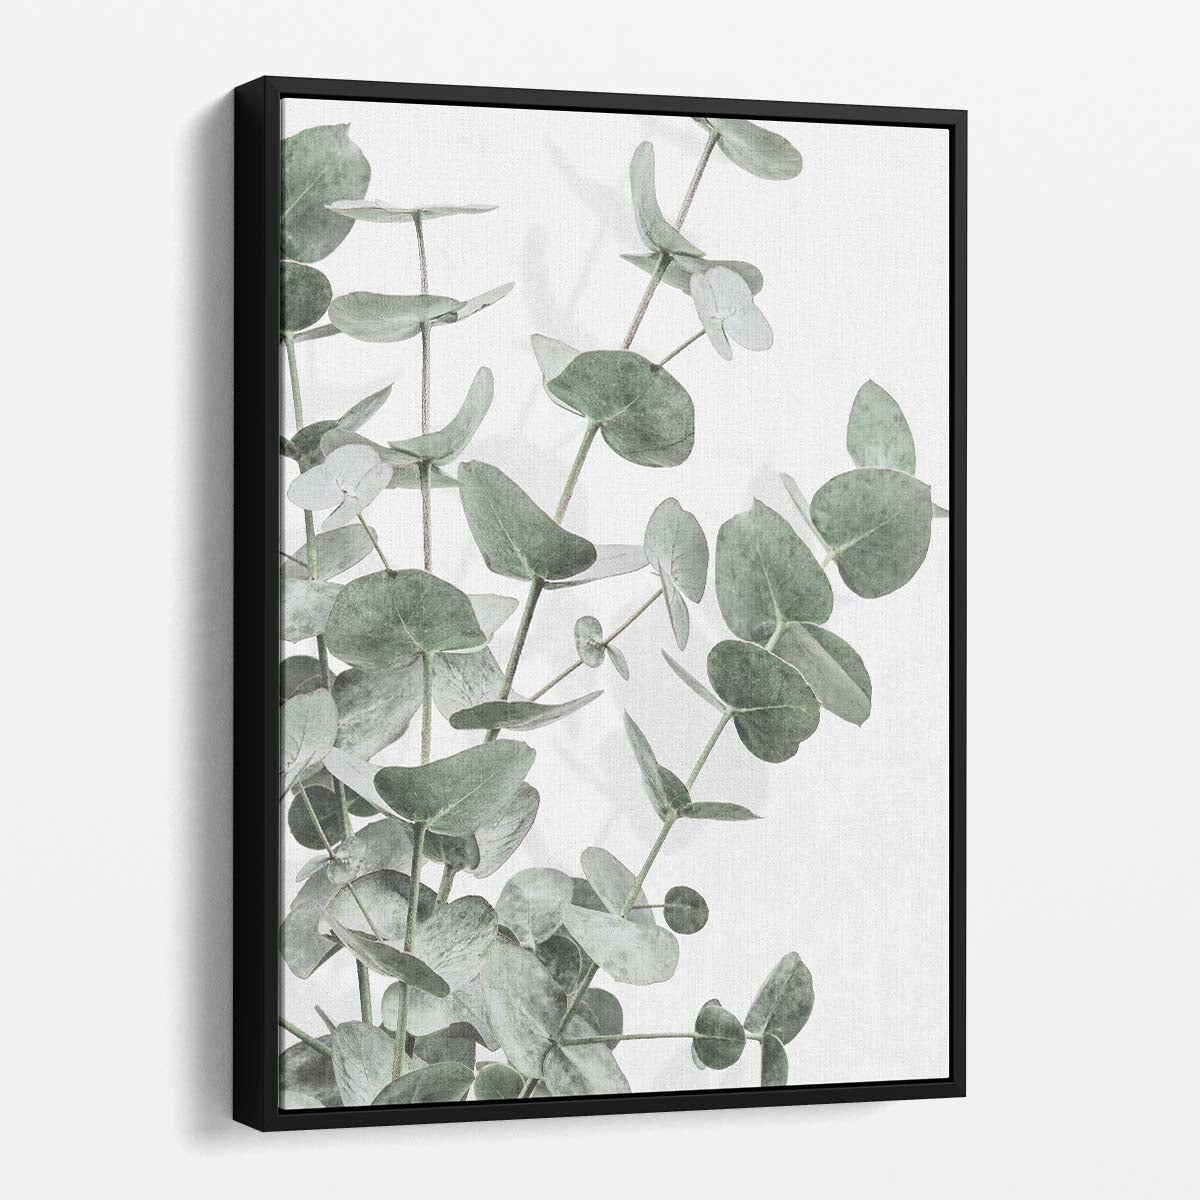 Botanical Eucalyptus Leaves Still Life Photography Wall Art by Luxuriance Designs, made in USA